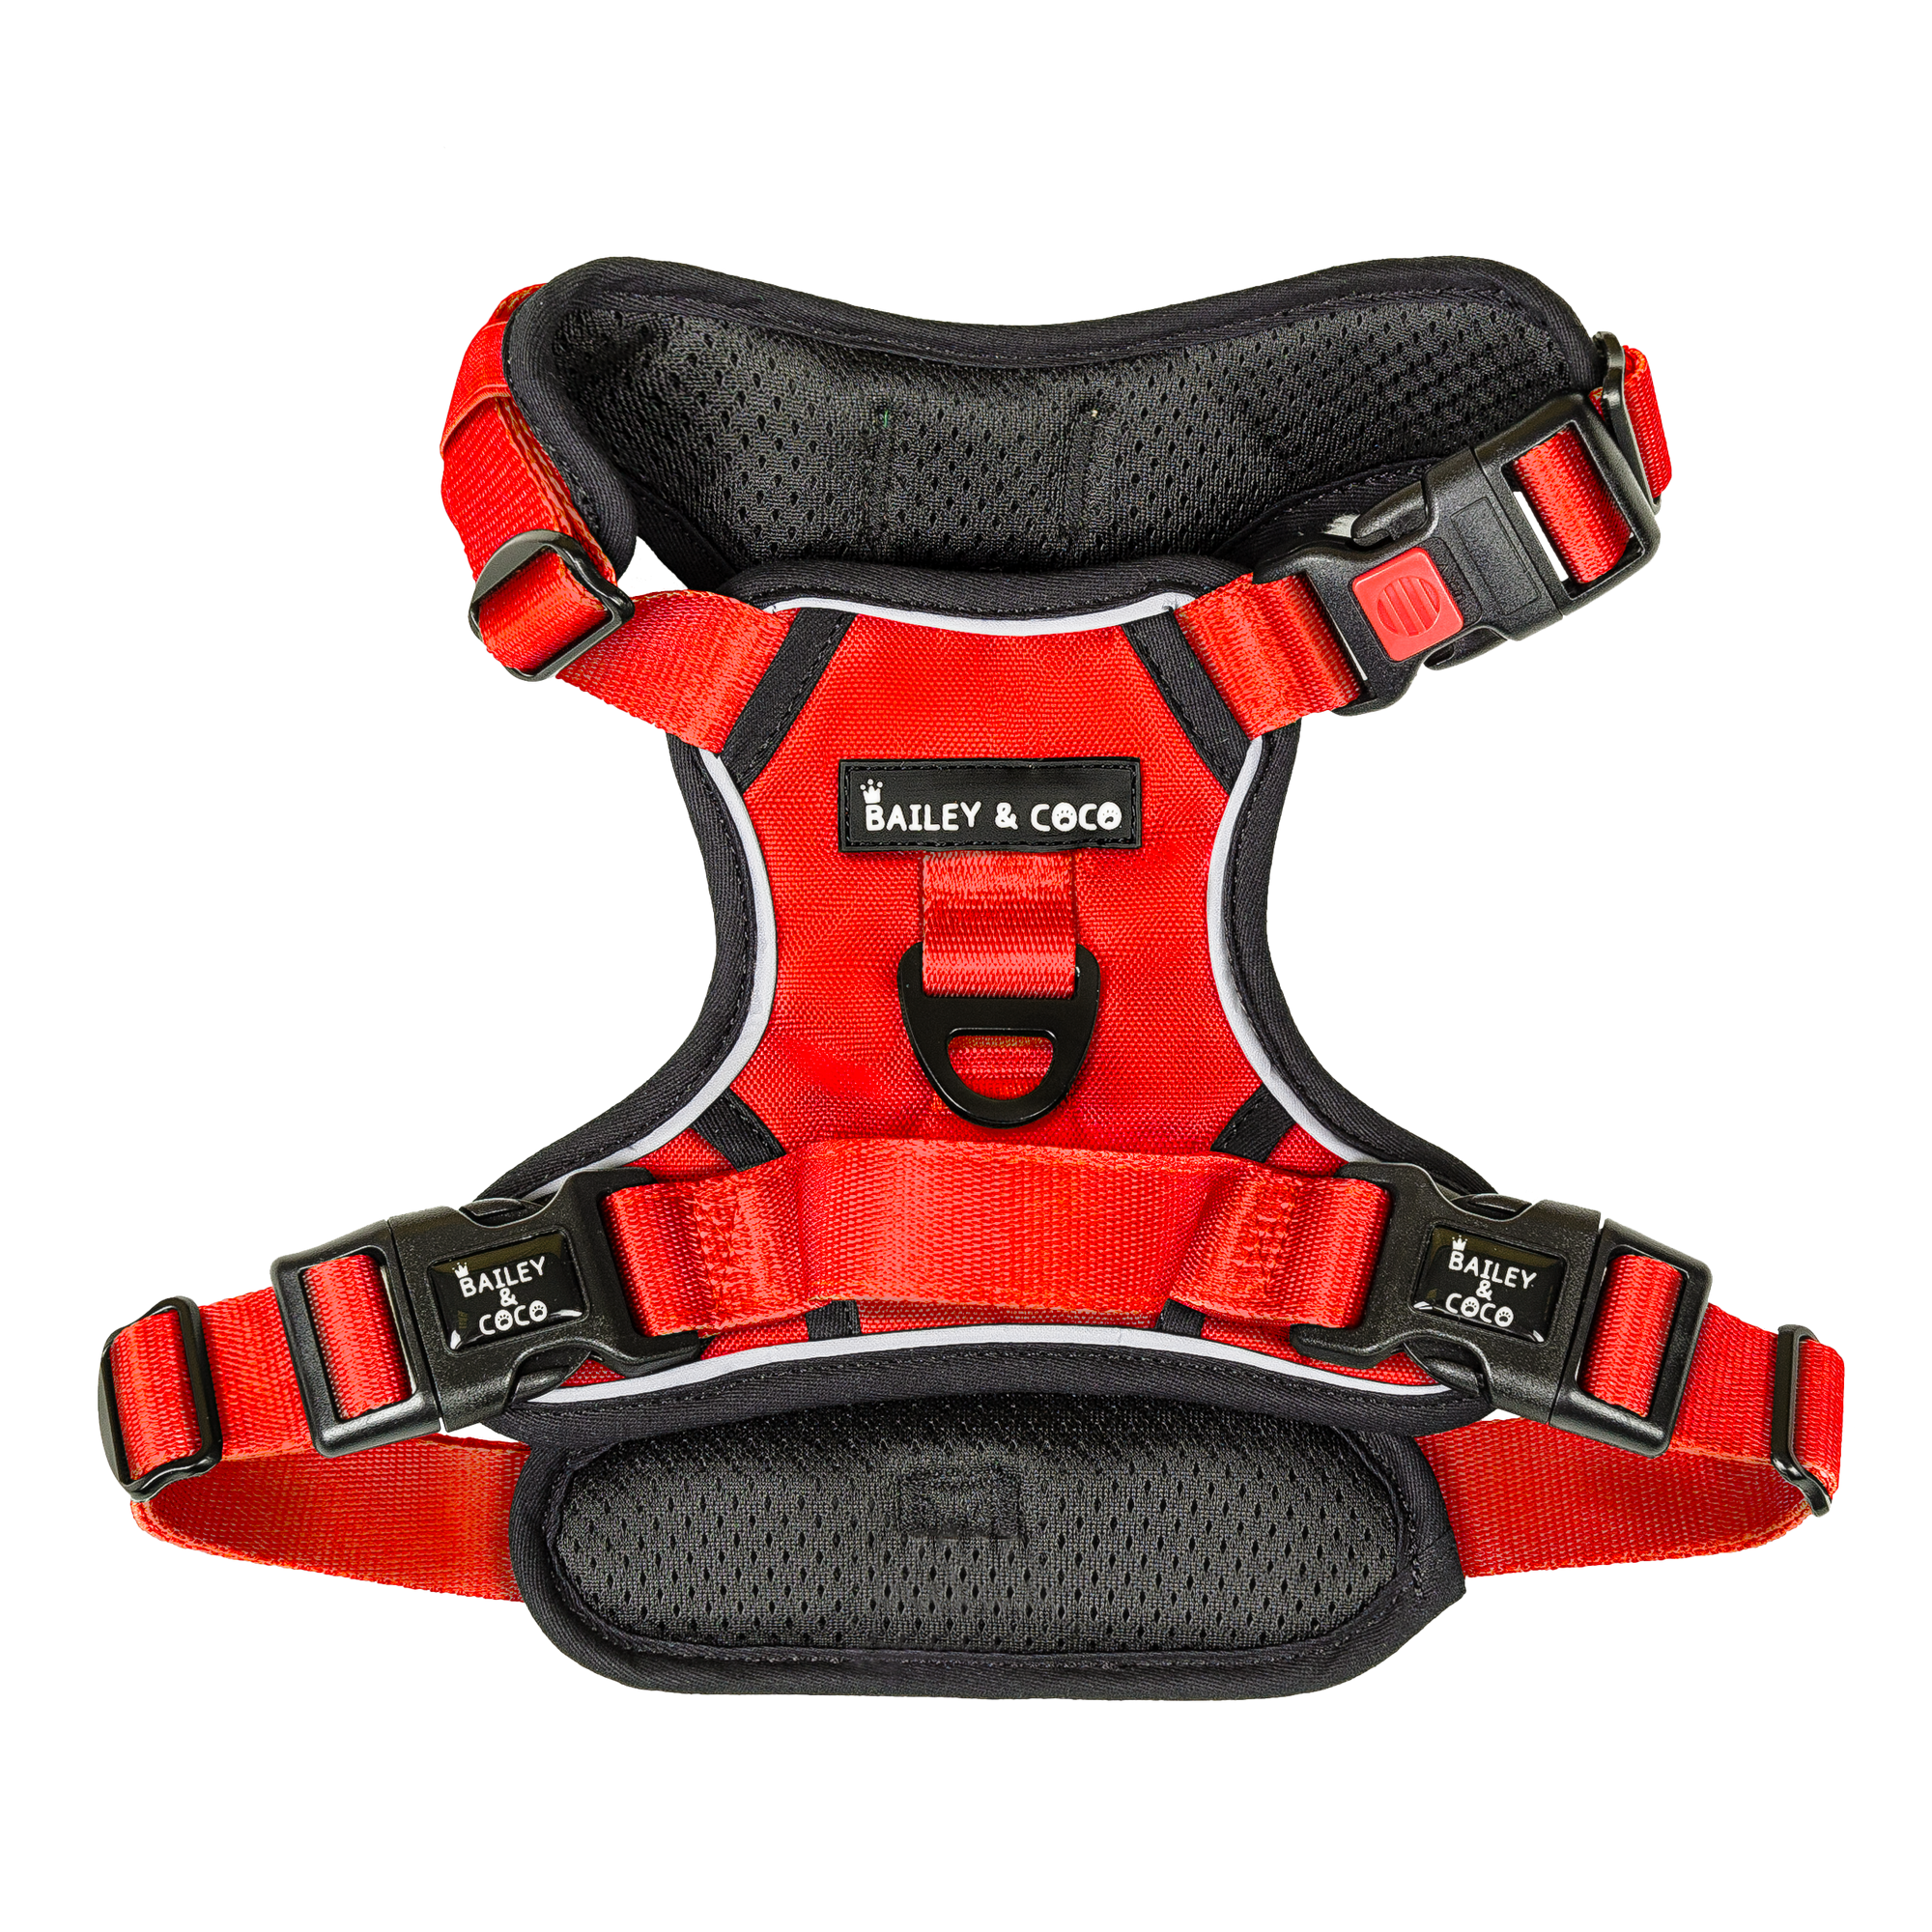 Trail & Glow® Dog Harness - The Red One.